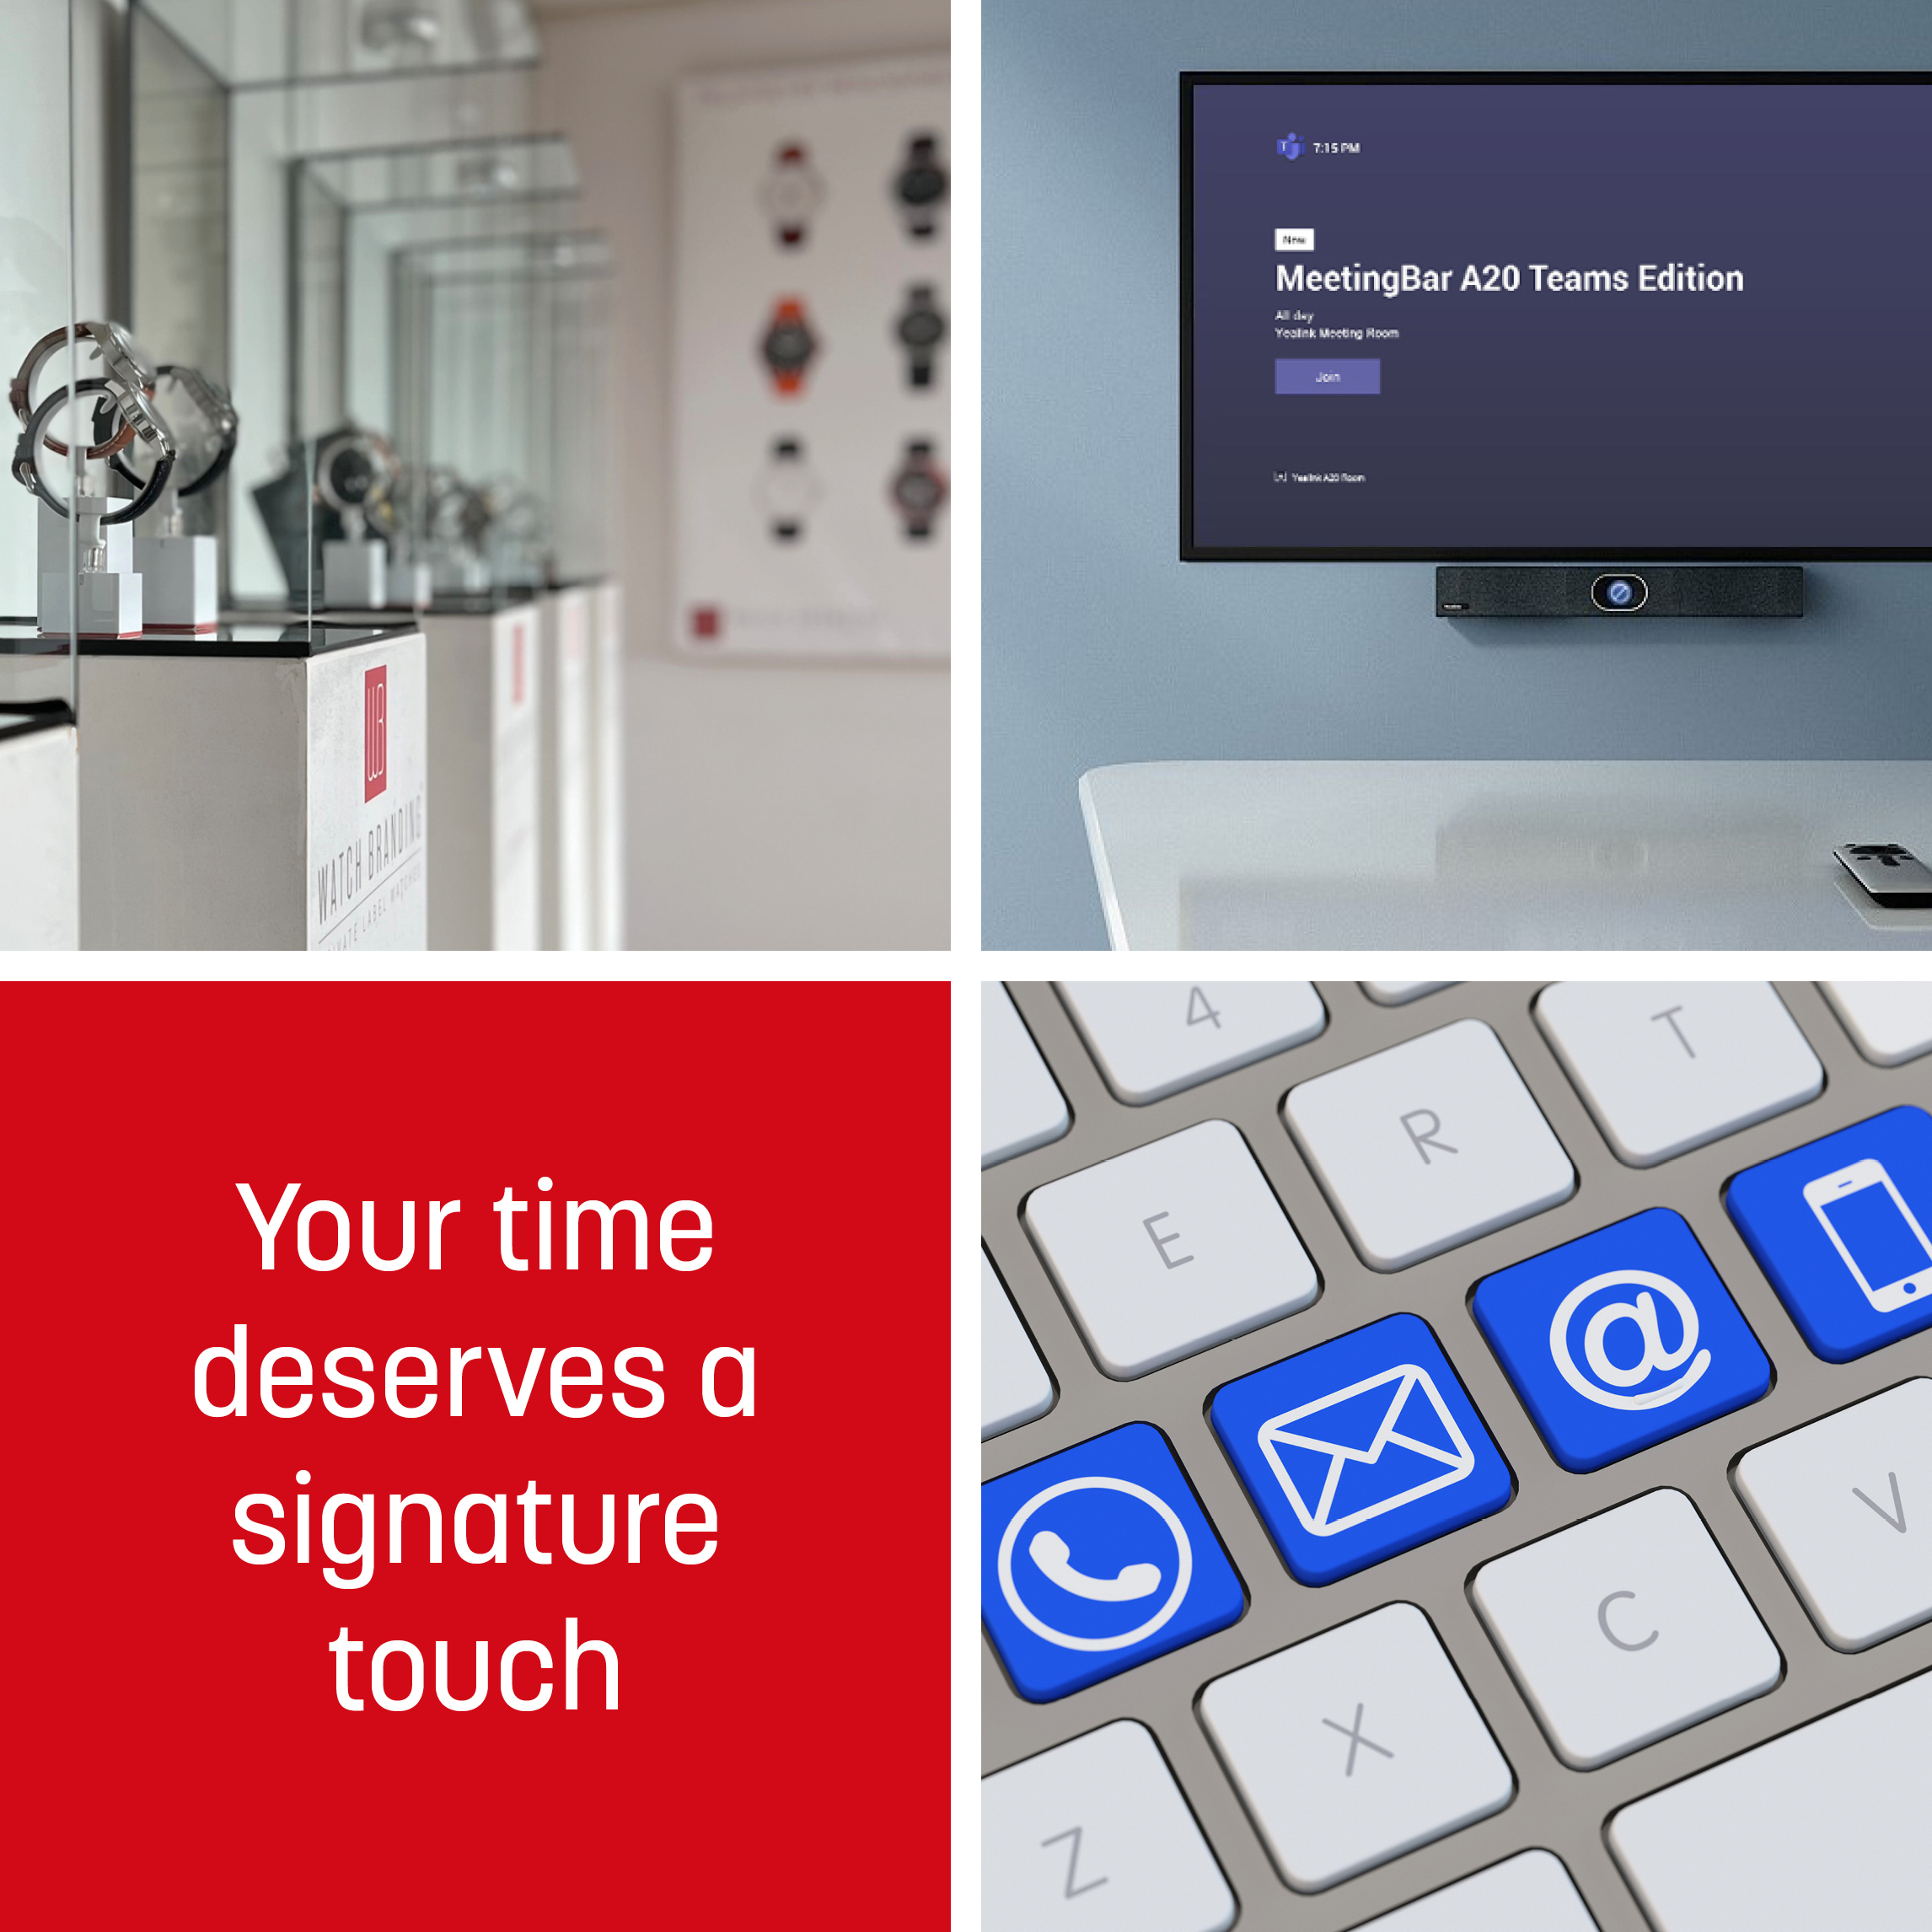 Watch Branding - Connecting made easy with various communication options. Explore our collection of custom logo watches, promotional watches, and find your perfect fit. Visit our Netherlands headquarters, schedule a Teams meeting, or contact us via phone, WhatsApp, or email. Your time deserves a signature touch